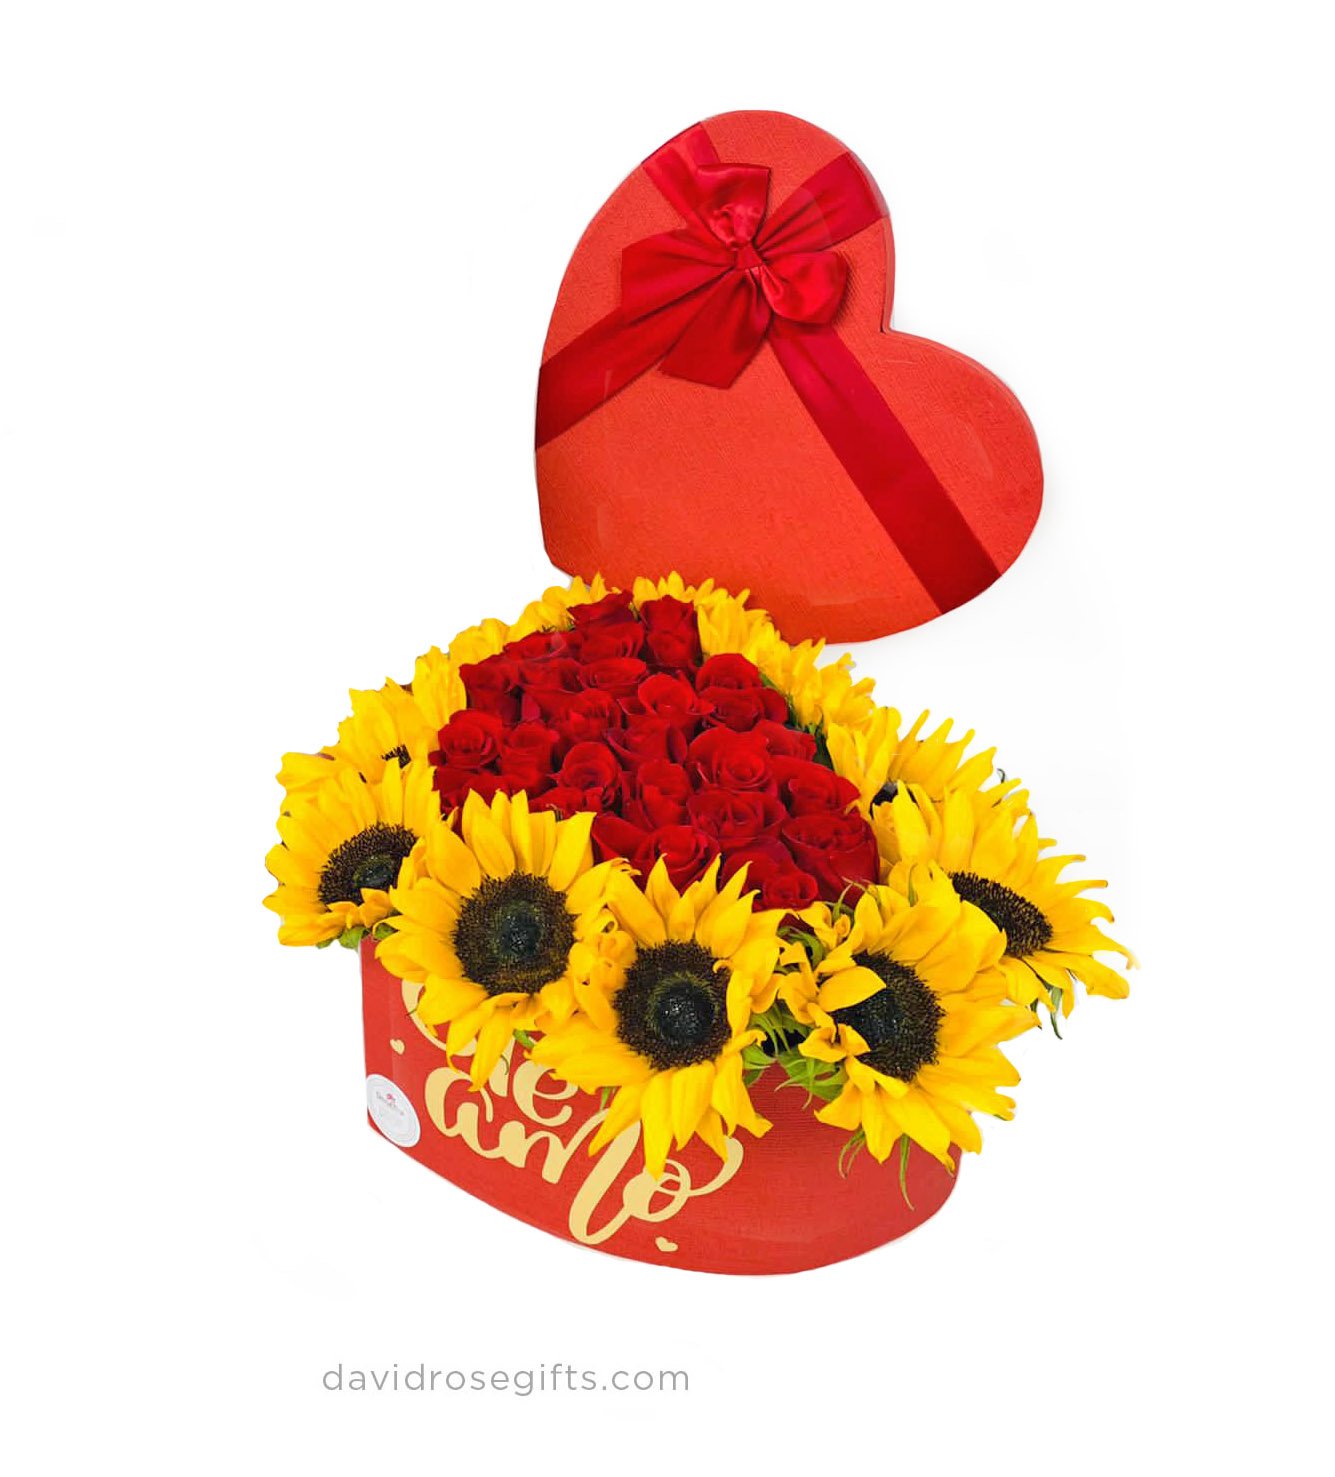 Sunflowers and Roses Box